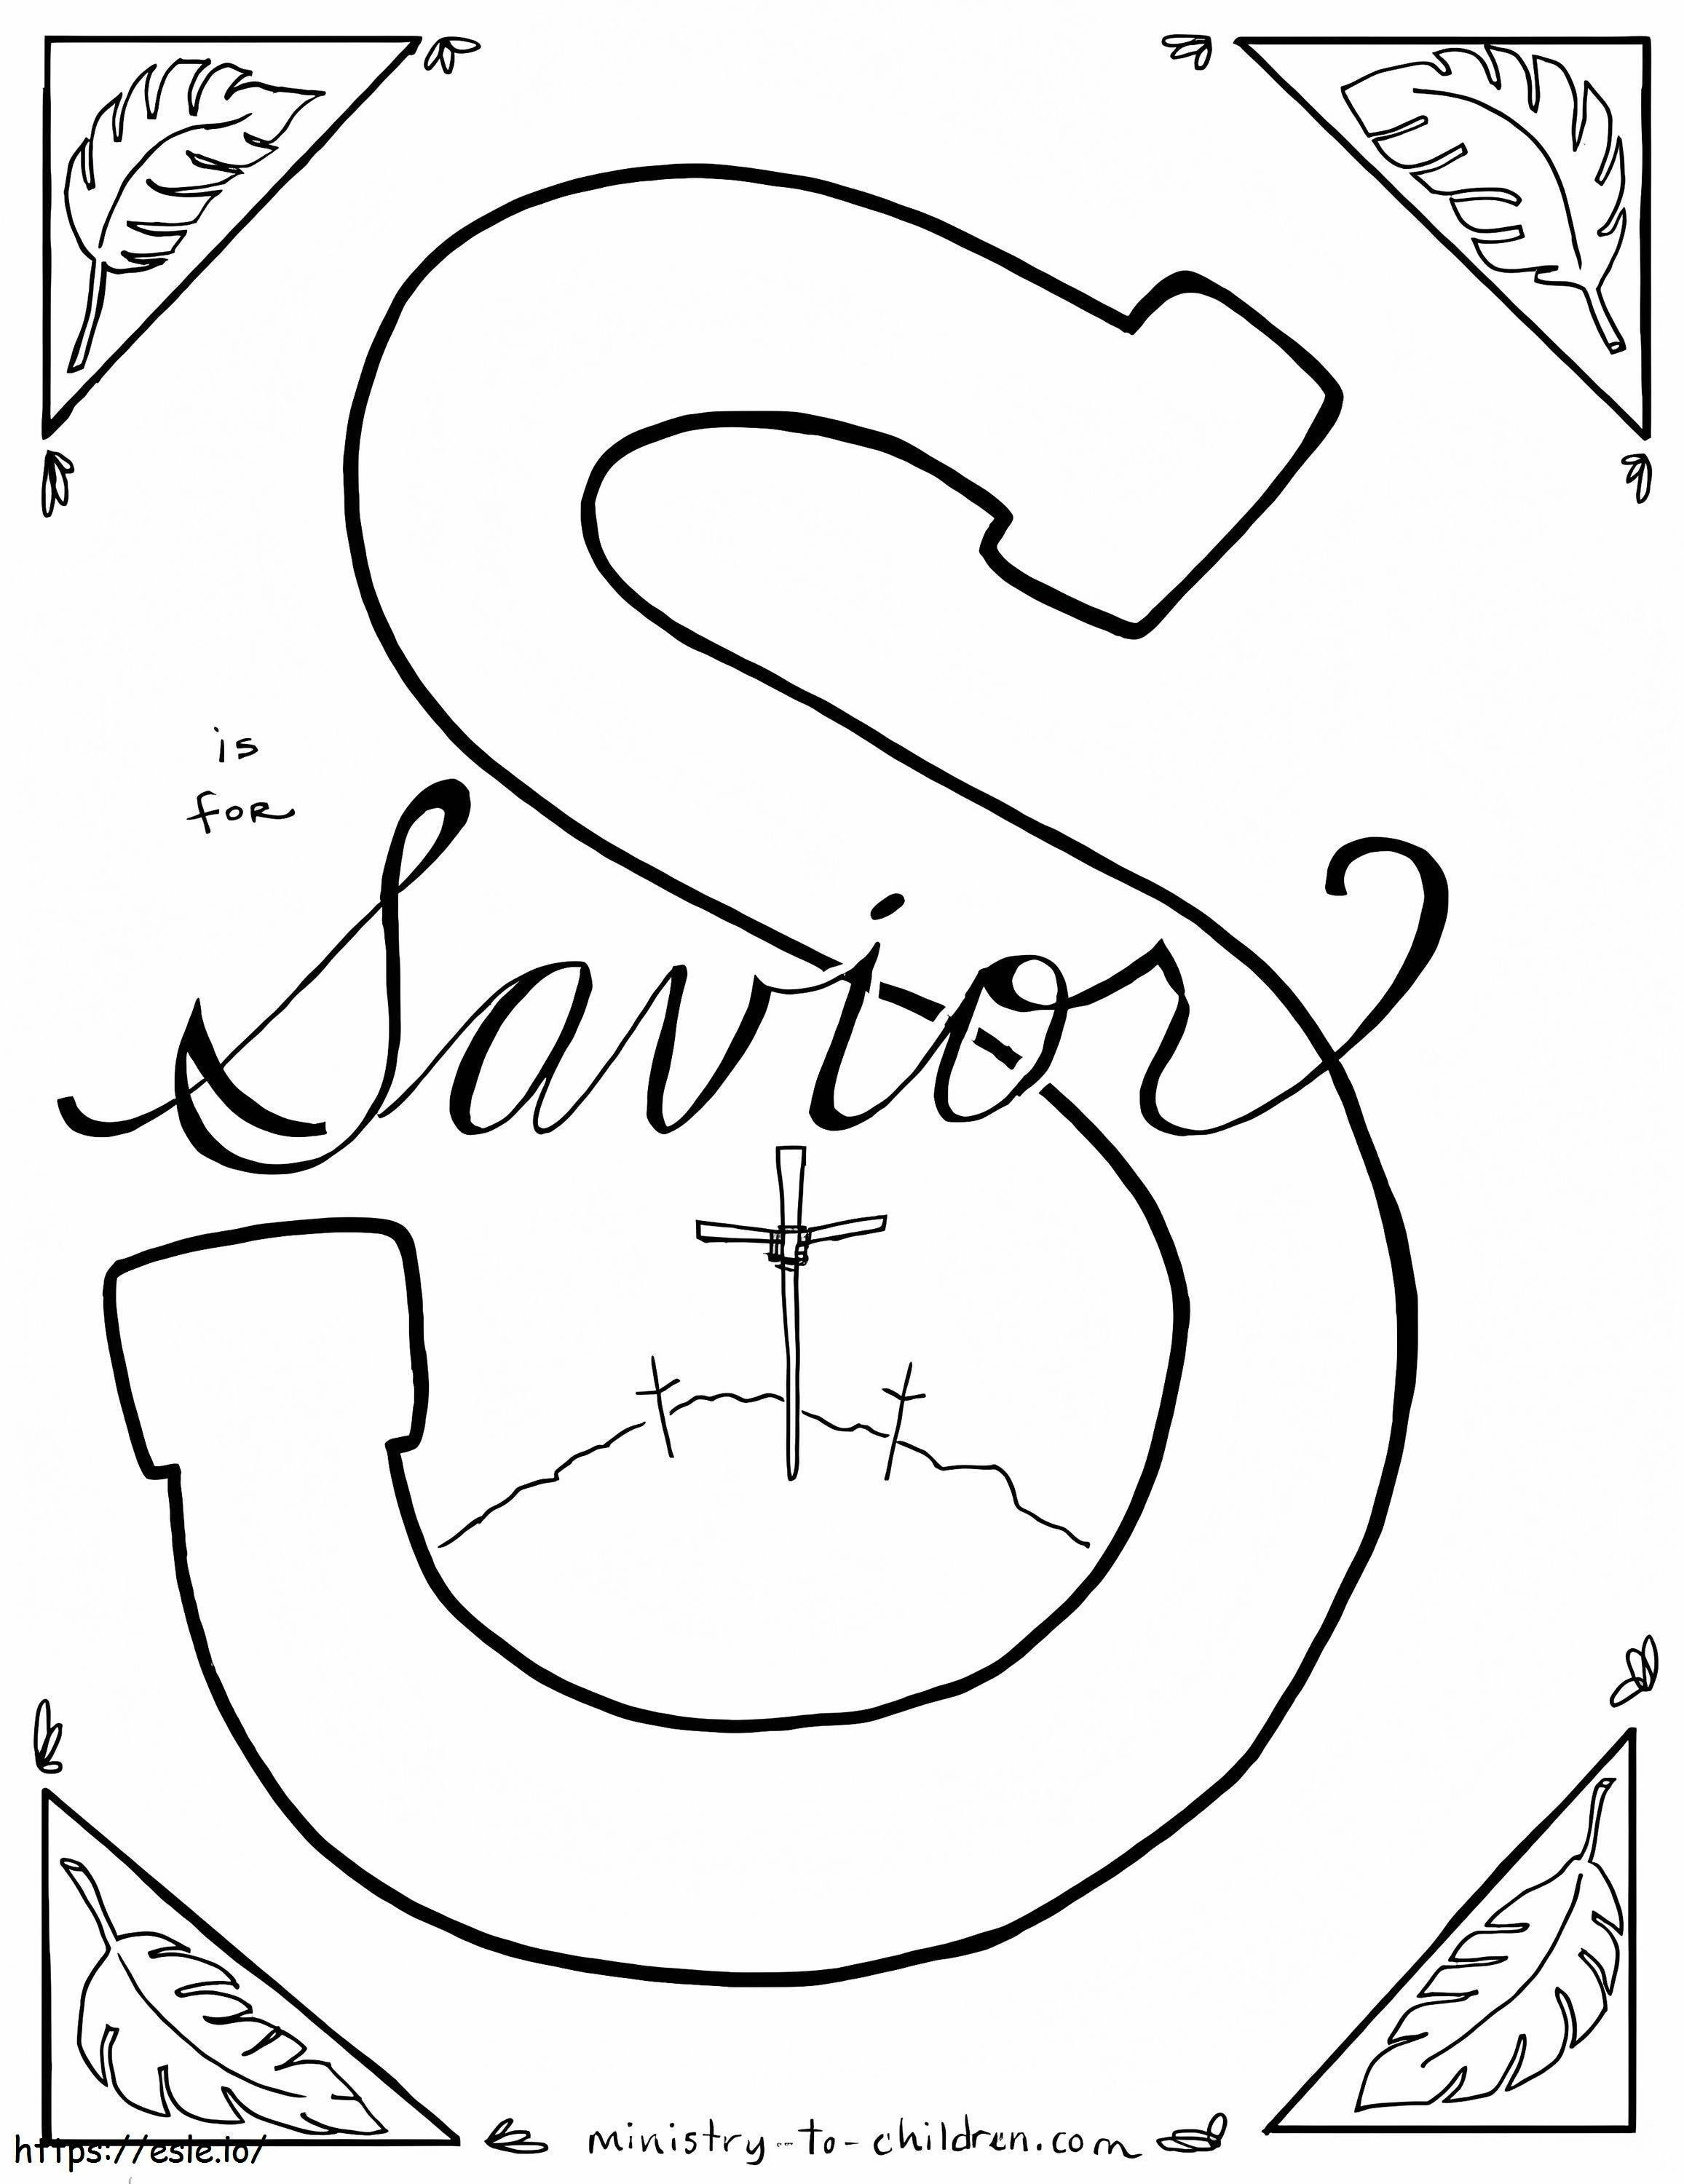 S Is For Savior coloring page